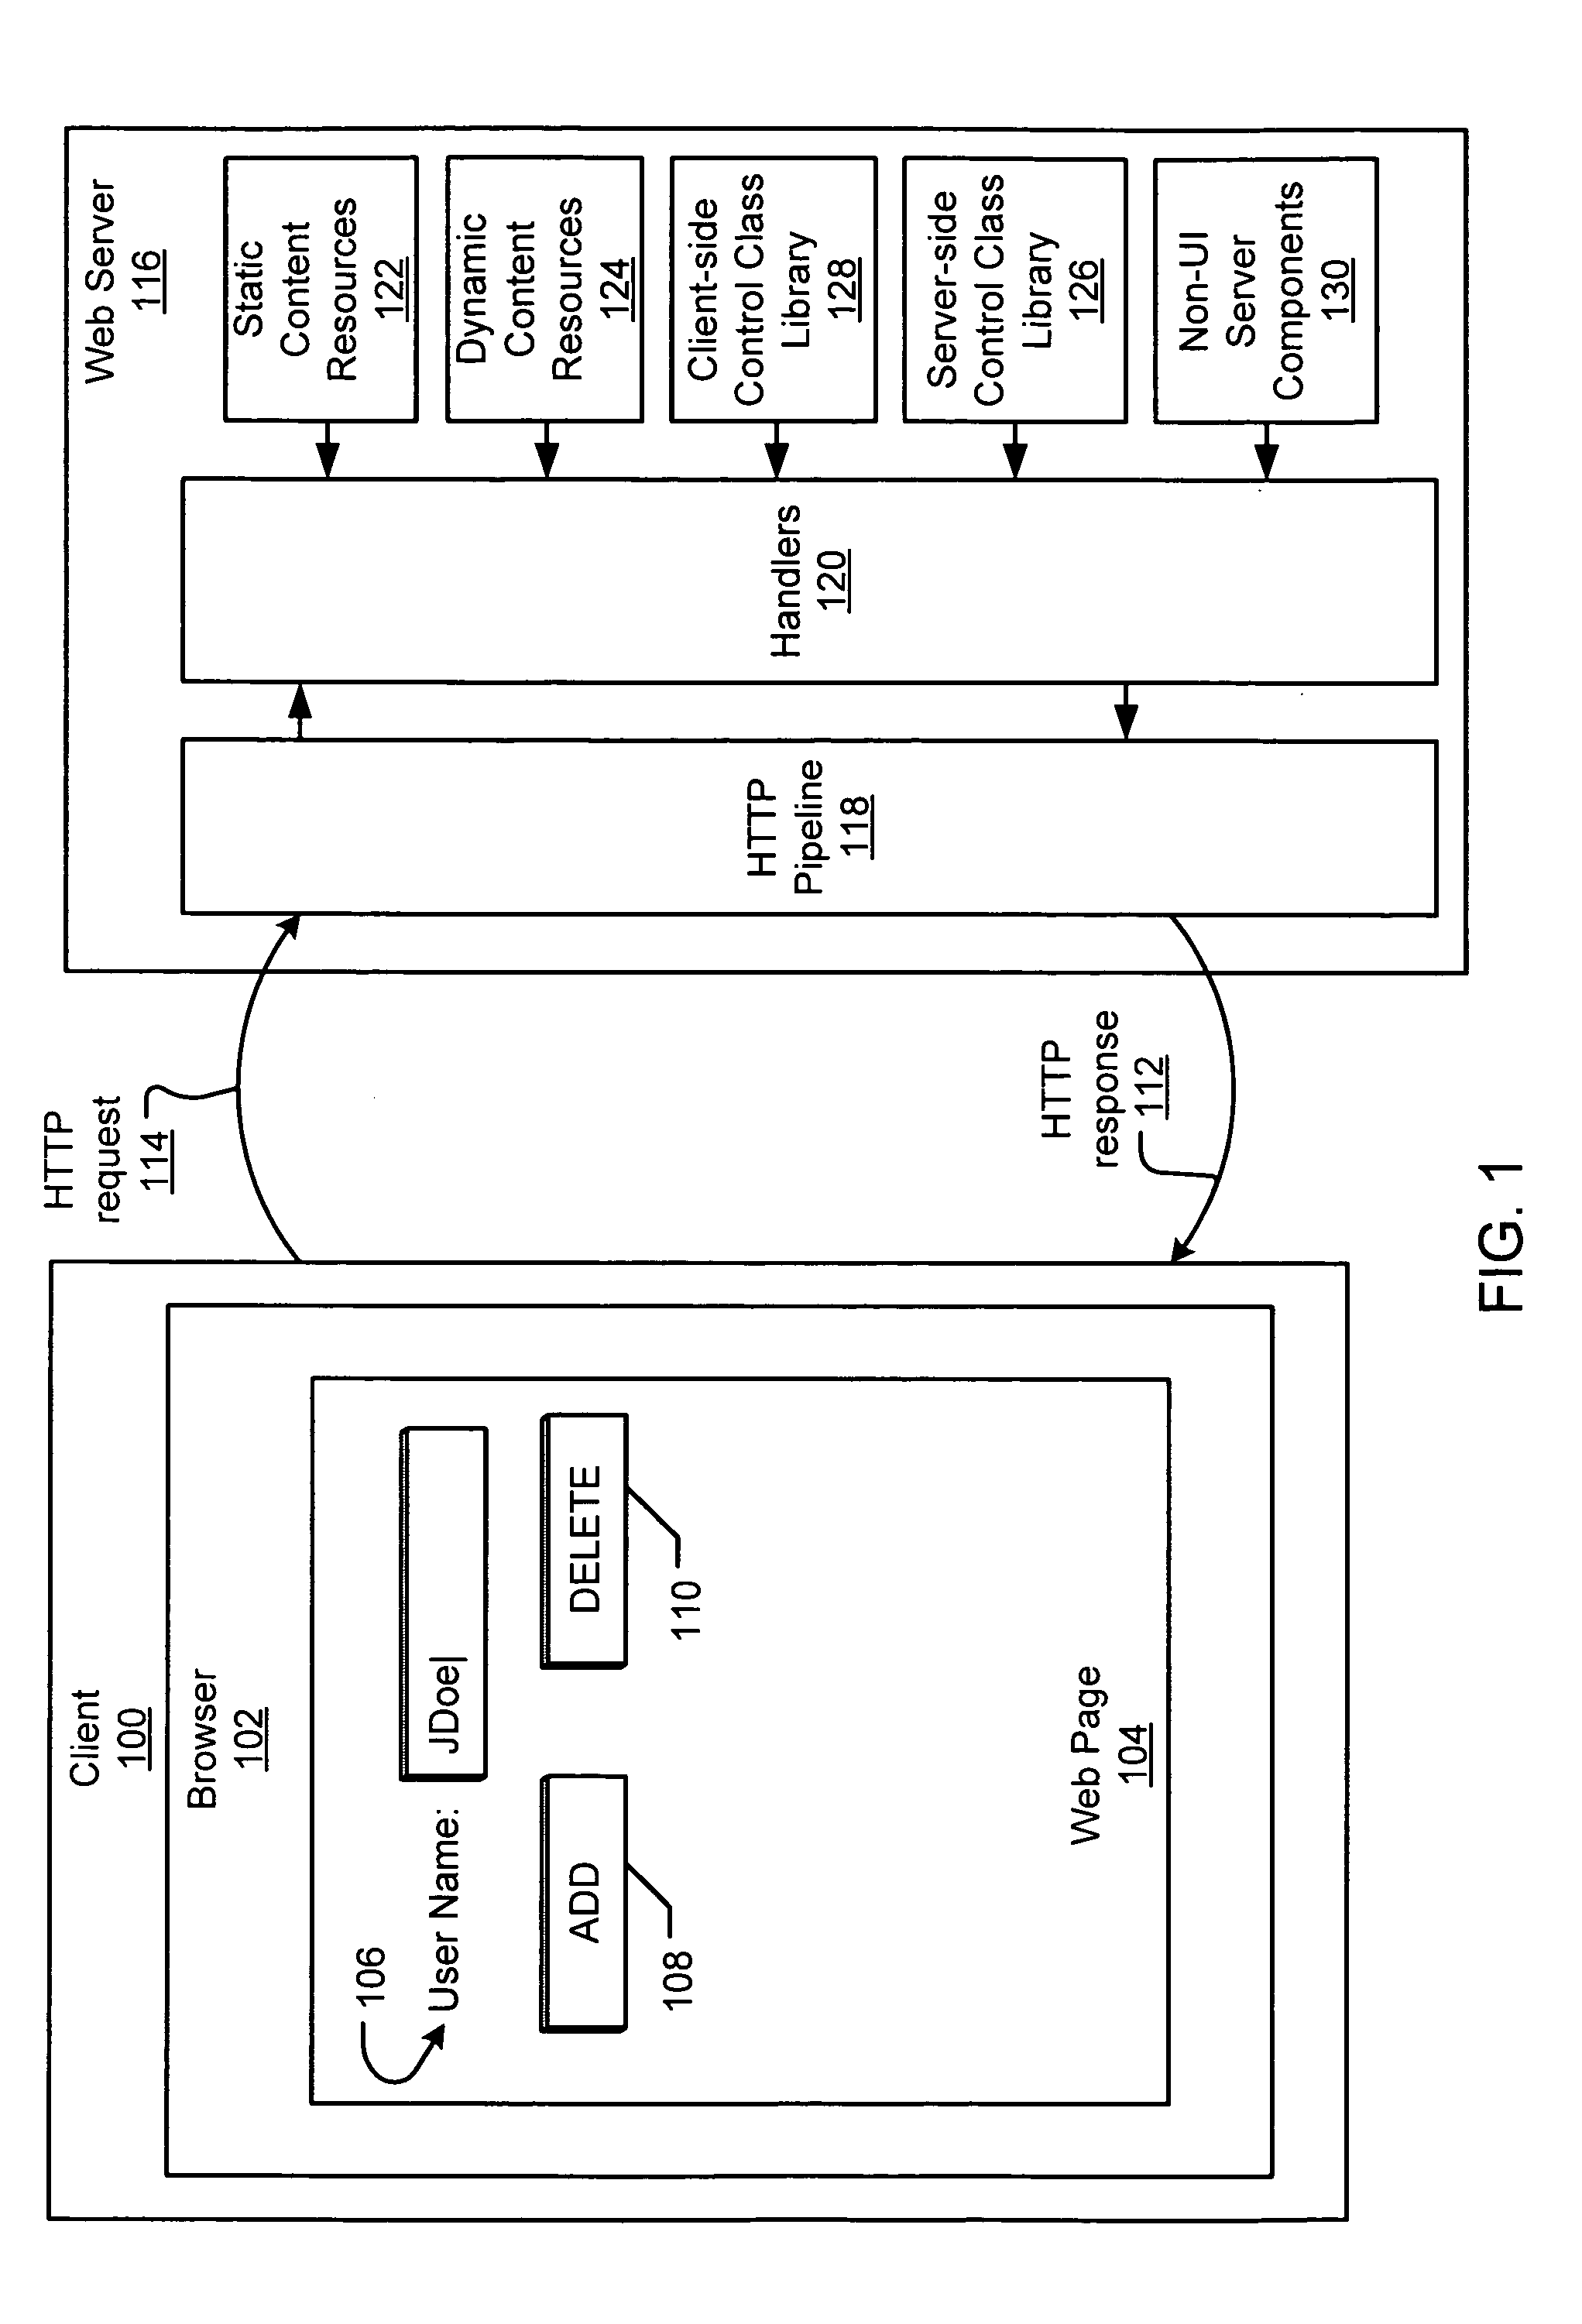 State management of server-side control objects